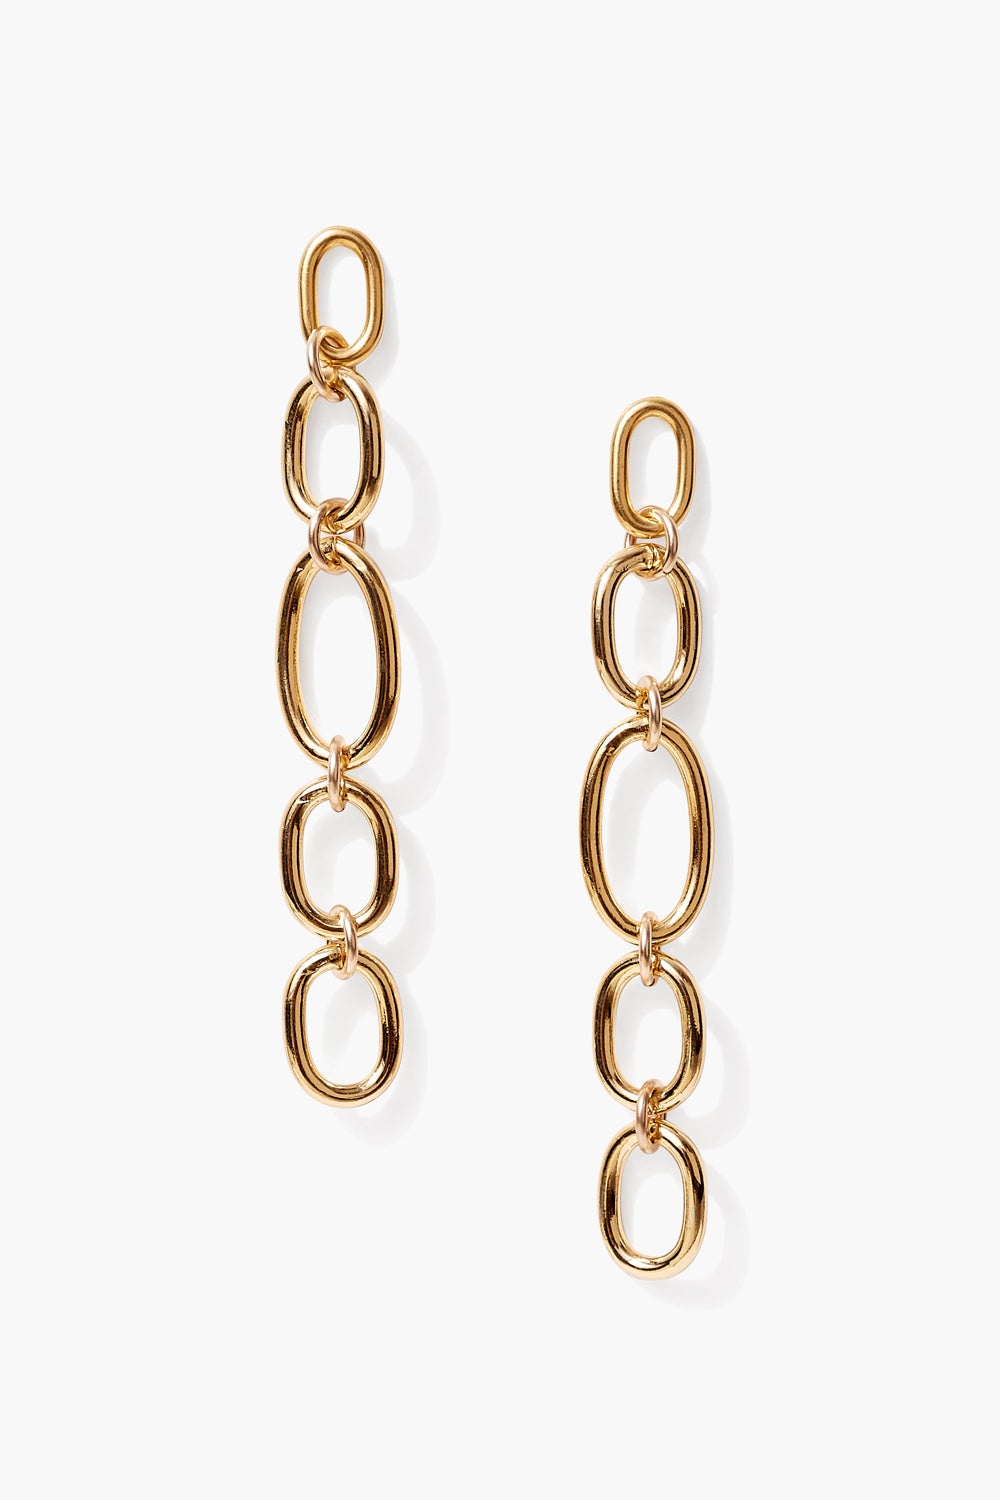 GOLD CHAIN LINK EARRINGS - Kingfisher Road - Online Boutique